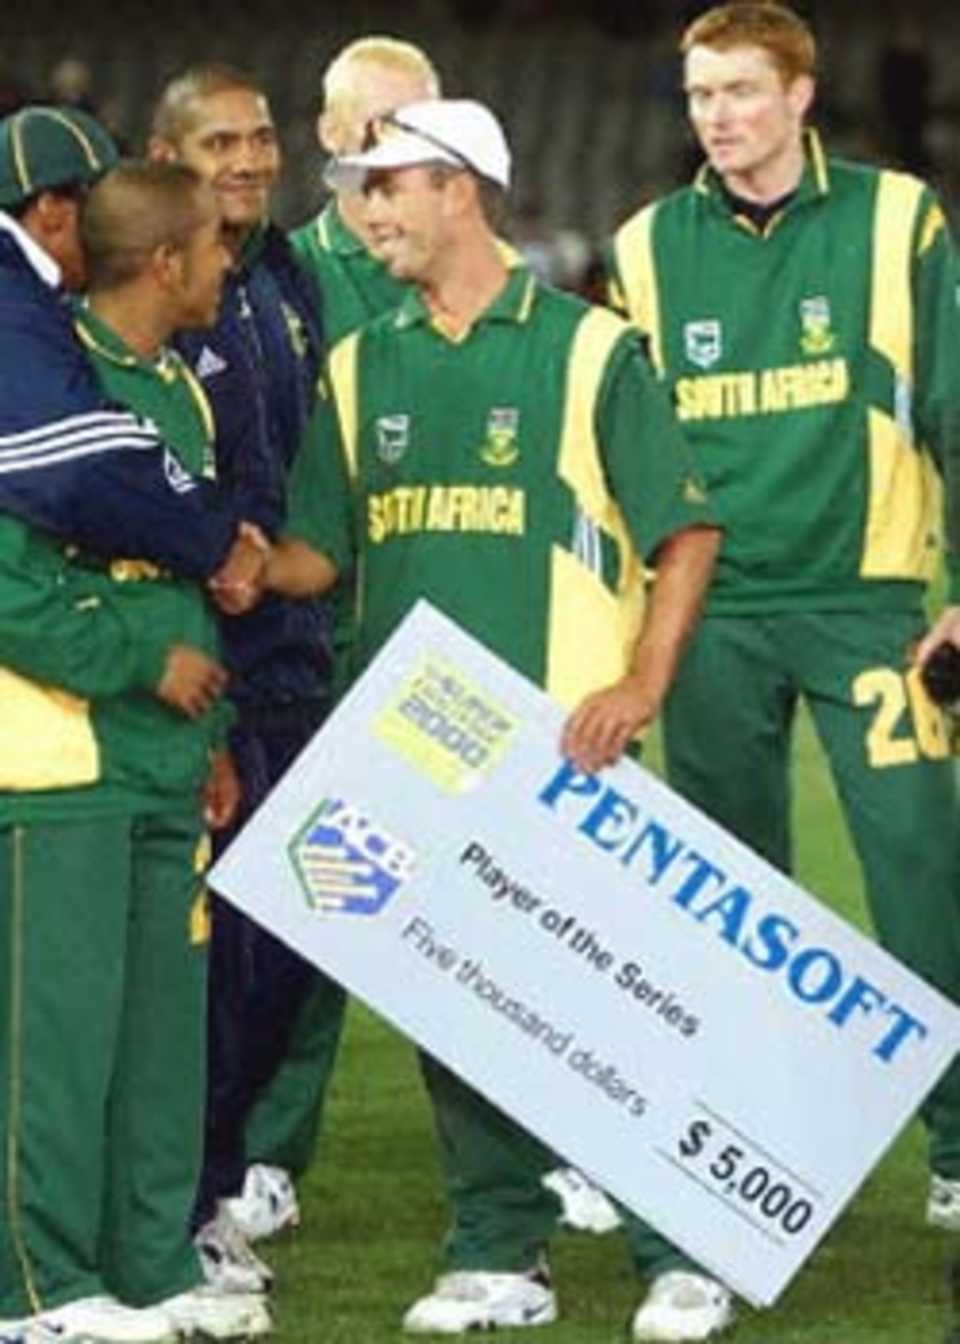 South African bowler Nicky Boje (C) is congratulated by his teammates after winning player of the match and the series against Australia after their one-day cricket match played under a closed roof at the Colonial Stadium in Melbourne. Being played in the middle of winter in Melbourne, South Africa scored 206-7 from their 50 overs and restricted Australia to 198-9 to draw the three match series 1-1 with one game tied. South Africa in Australia, 2000/01, 3rd One-Day International, Australia v South Africa, Colonial Stadium, Melbourne, 20 August 2000.